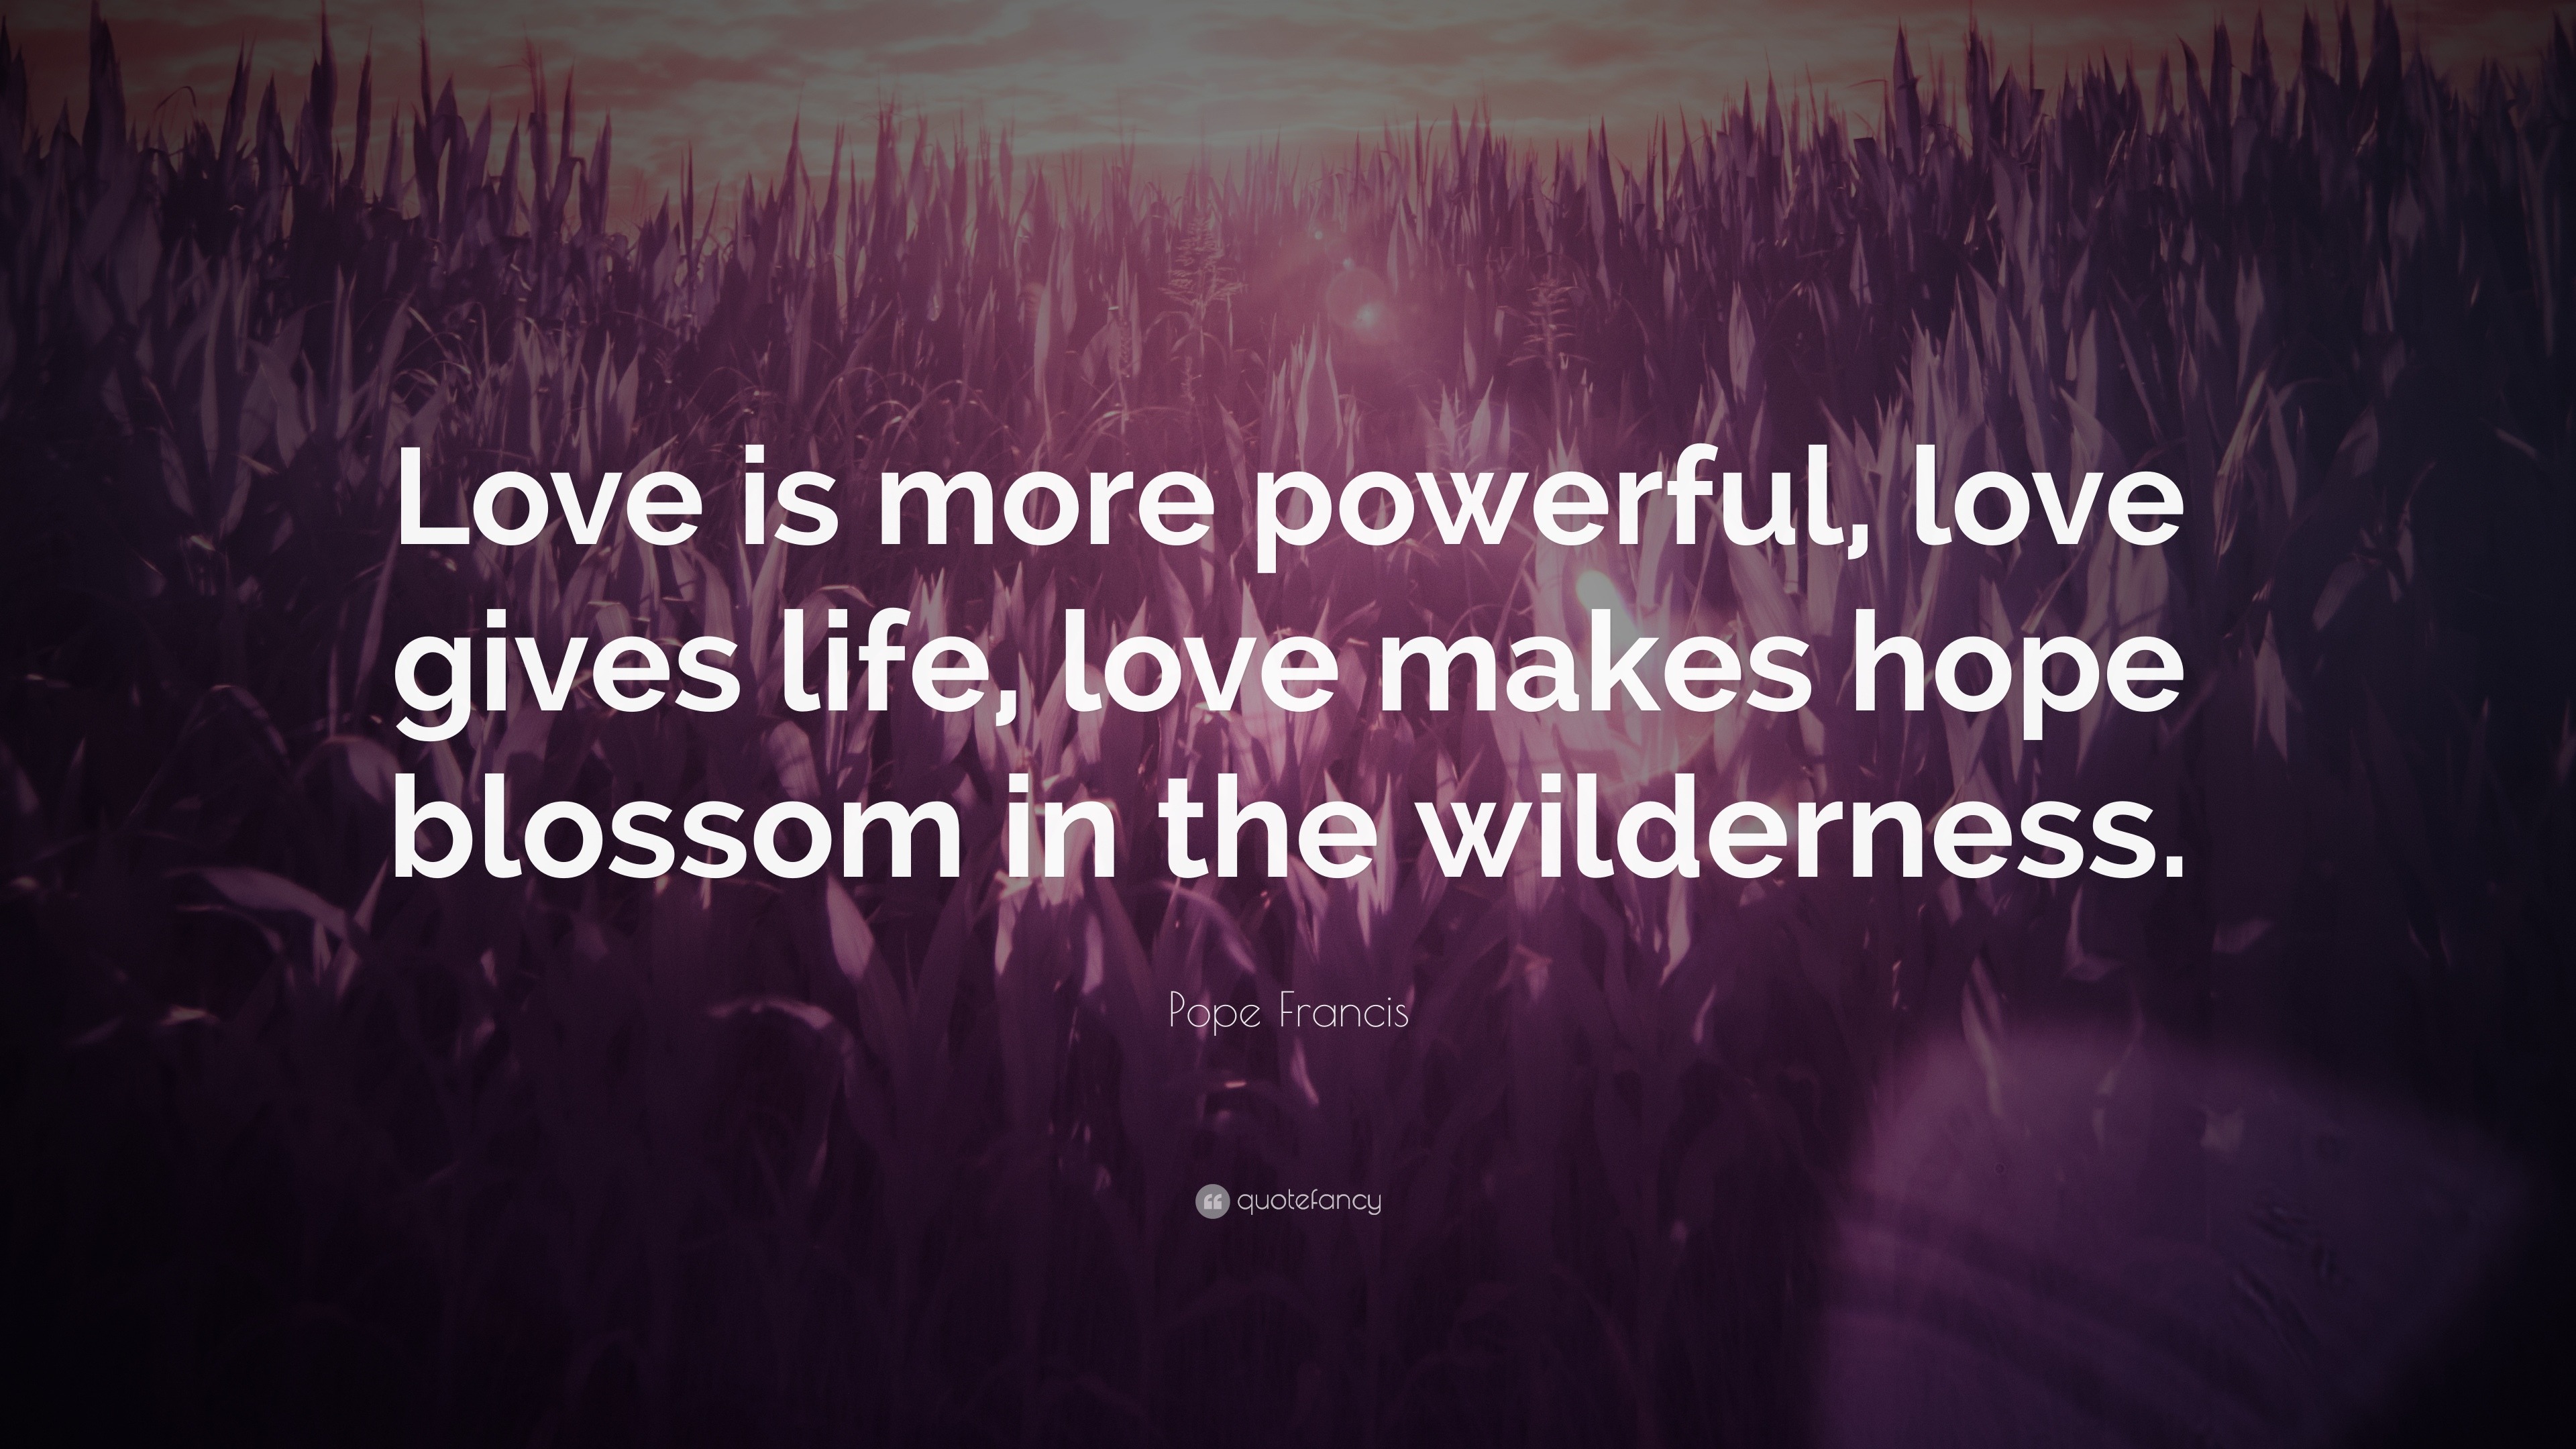 10 Powerful  Quotes  About Love  and Life Best life quotes  